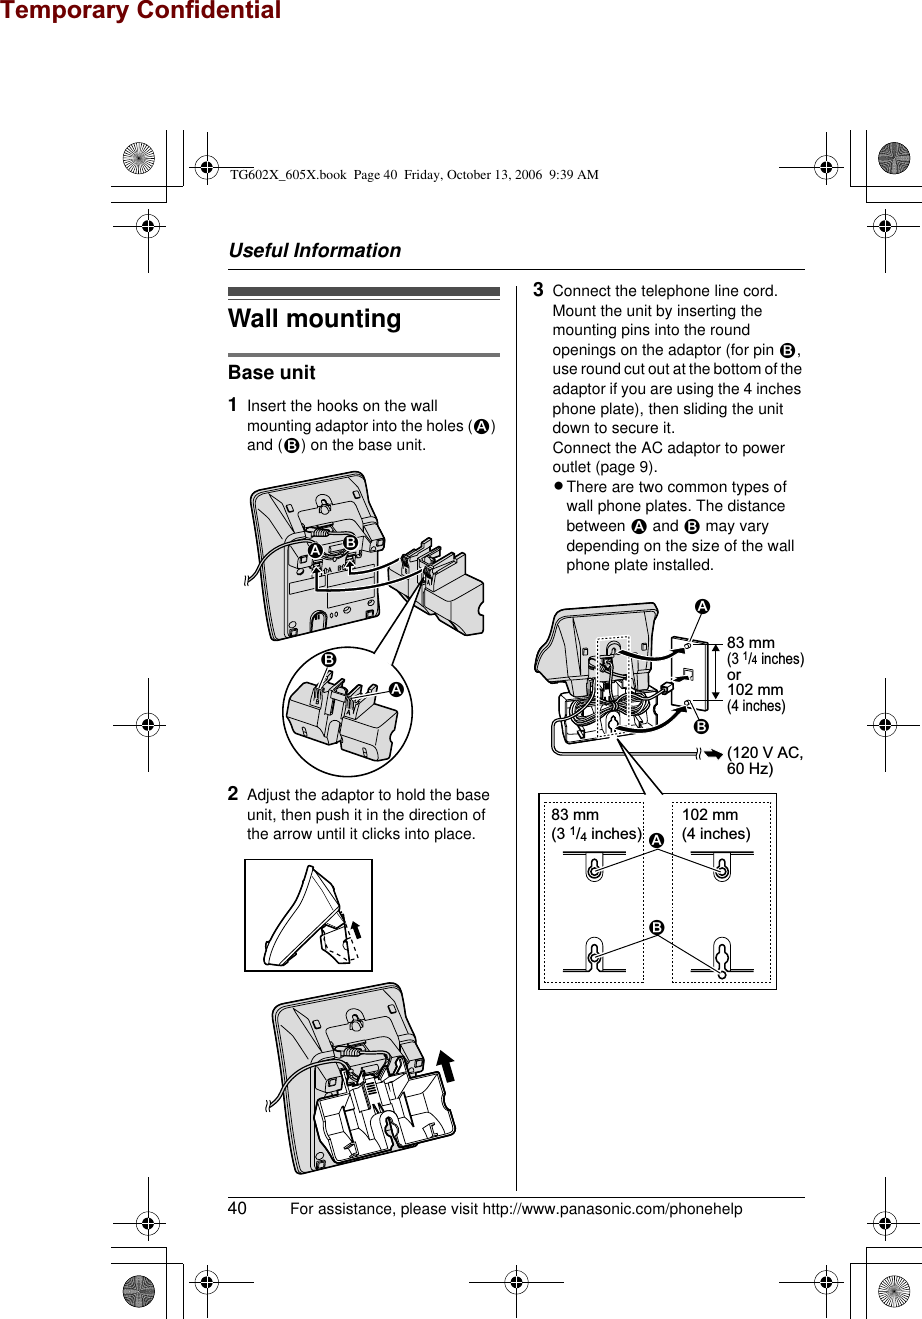 Useful Information40 For assistance, please visit http://www.panasonic.com/phonehelpWall mountingBase unit1Insert the hooks on the wall mounting adaptor into the holes (1) and (2) on the base unit.2Adjust the adaptor to hold the base unit, then push it in the direction of the arrow until it clicks into place.3Connect the telephone line cord. Mount the unit by inserting the mounting pins into the round openings on the adaptor (for pin 2, use round cut out at the bottom of the adaptor if you are using the 4 inches phone plate), then sliding the unit down to secure it.Connect the AC adaptor to power outlet (page 9).LThere are two common types of wall phone plates. The distance between 1 and 2 may vary depending on the size of the wall phone plate installed.212183 mm(3 1/4 inches)102 mm(4 inches)2183 mm (3 1/4 inches)or102 mm (4 inches)1(120 V AC,60 Hz)2TG602X_605X.book  Page 40  Friday, October 13, 2006  9:39 AMTemporary Confidential